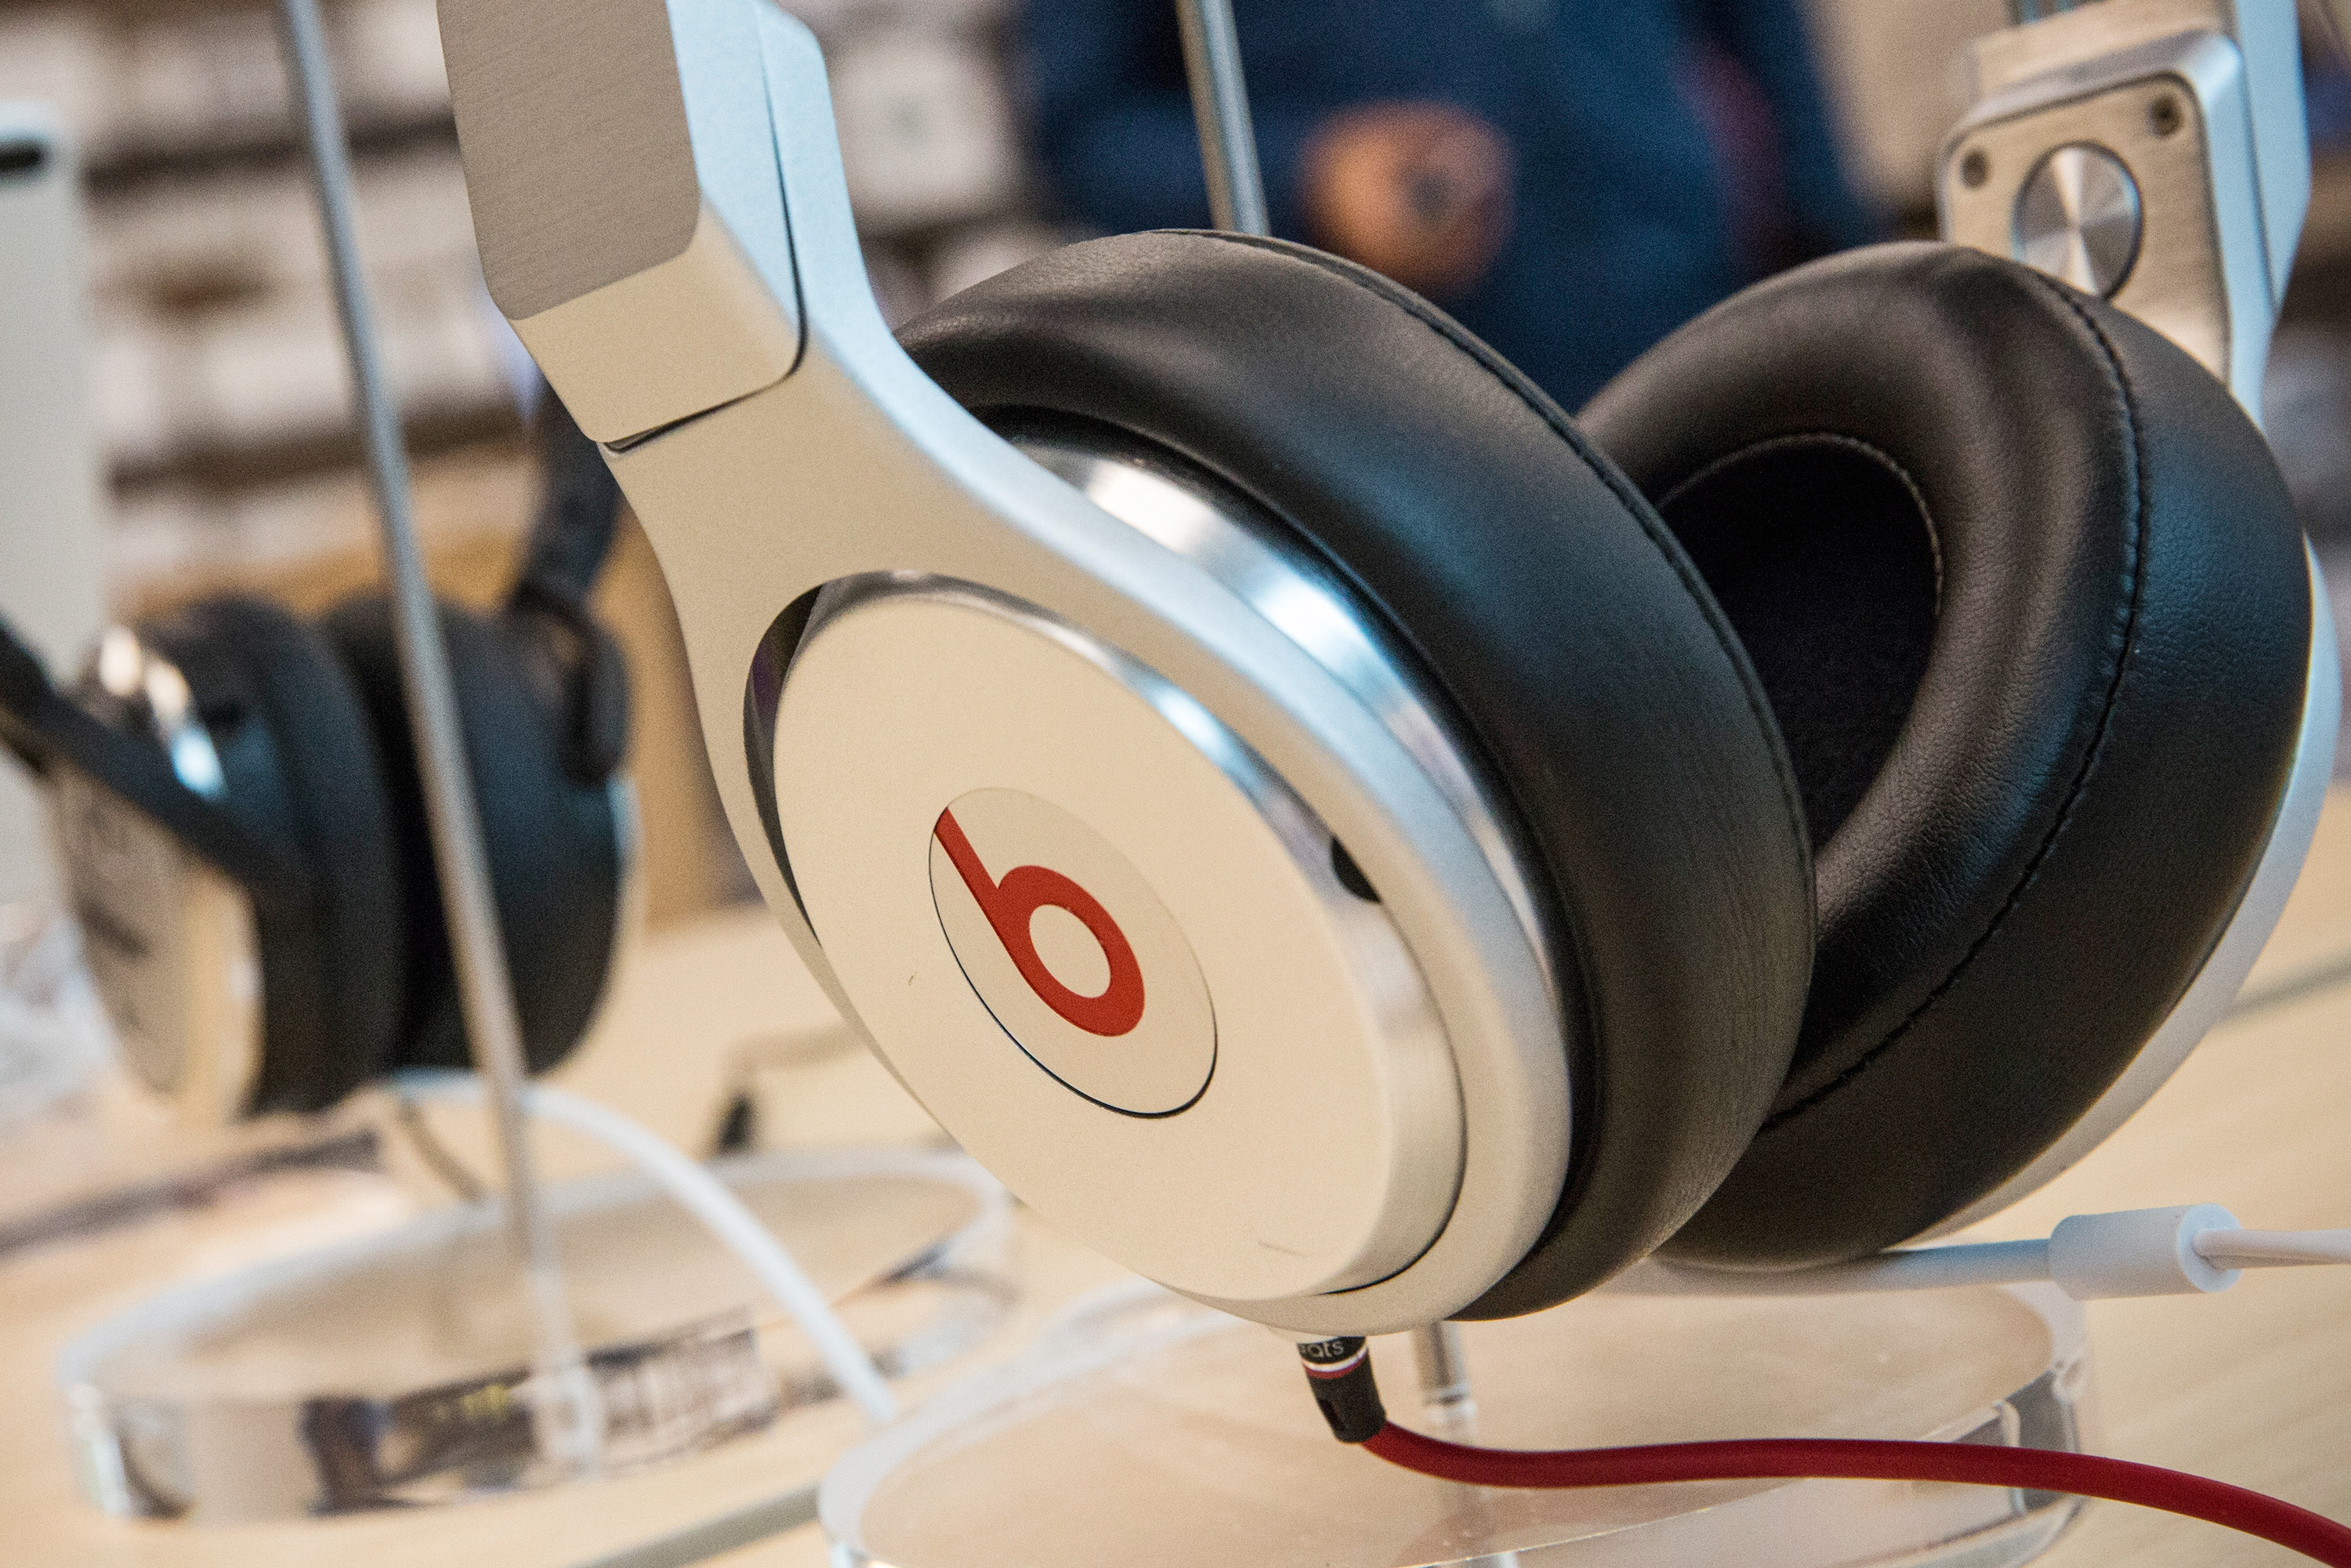 Beats headphones are sold in an Apple store on May 9, 2014 in New York City. (Andrew Burton&mdash;Getty Images)